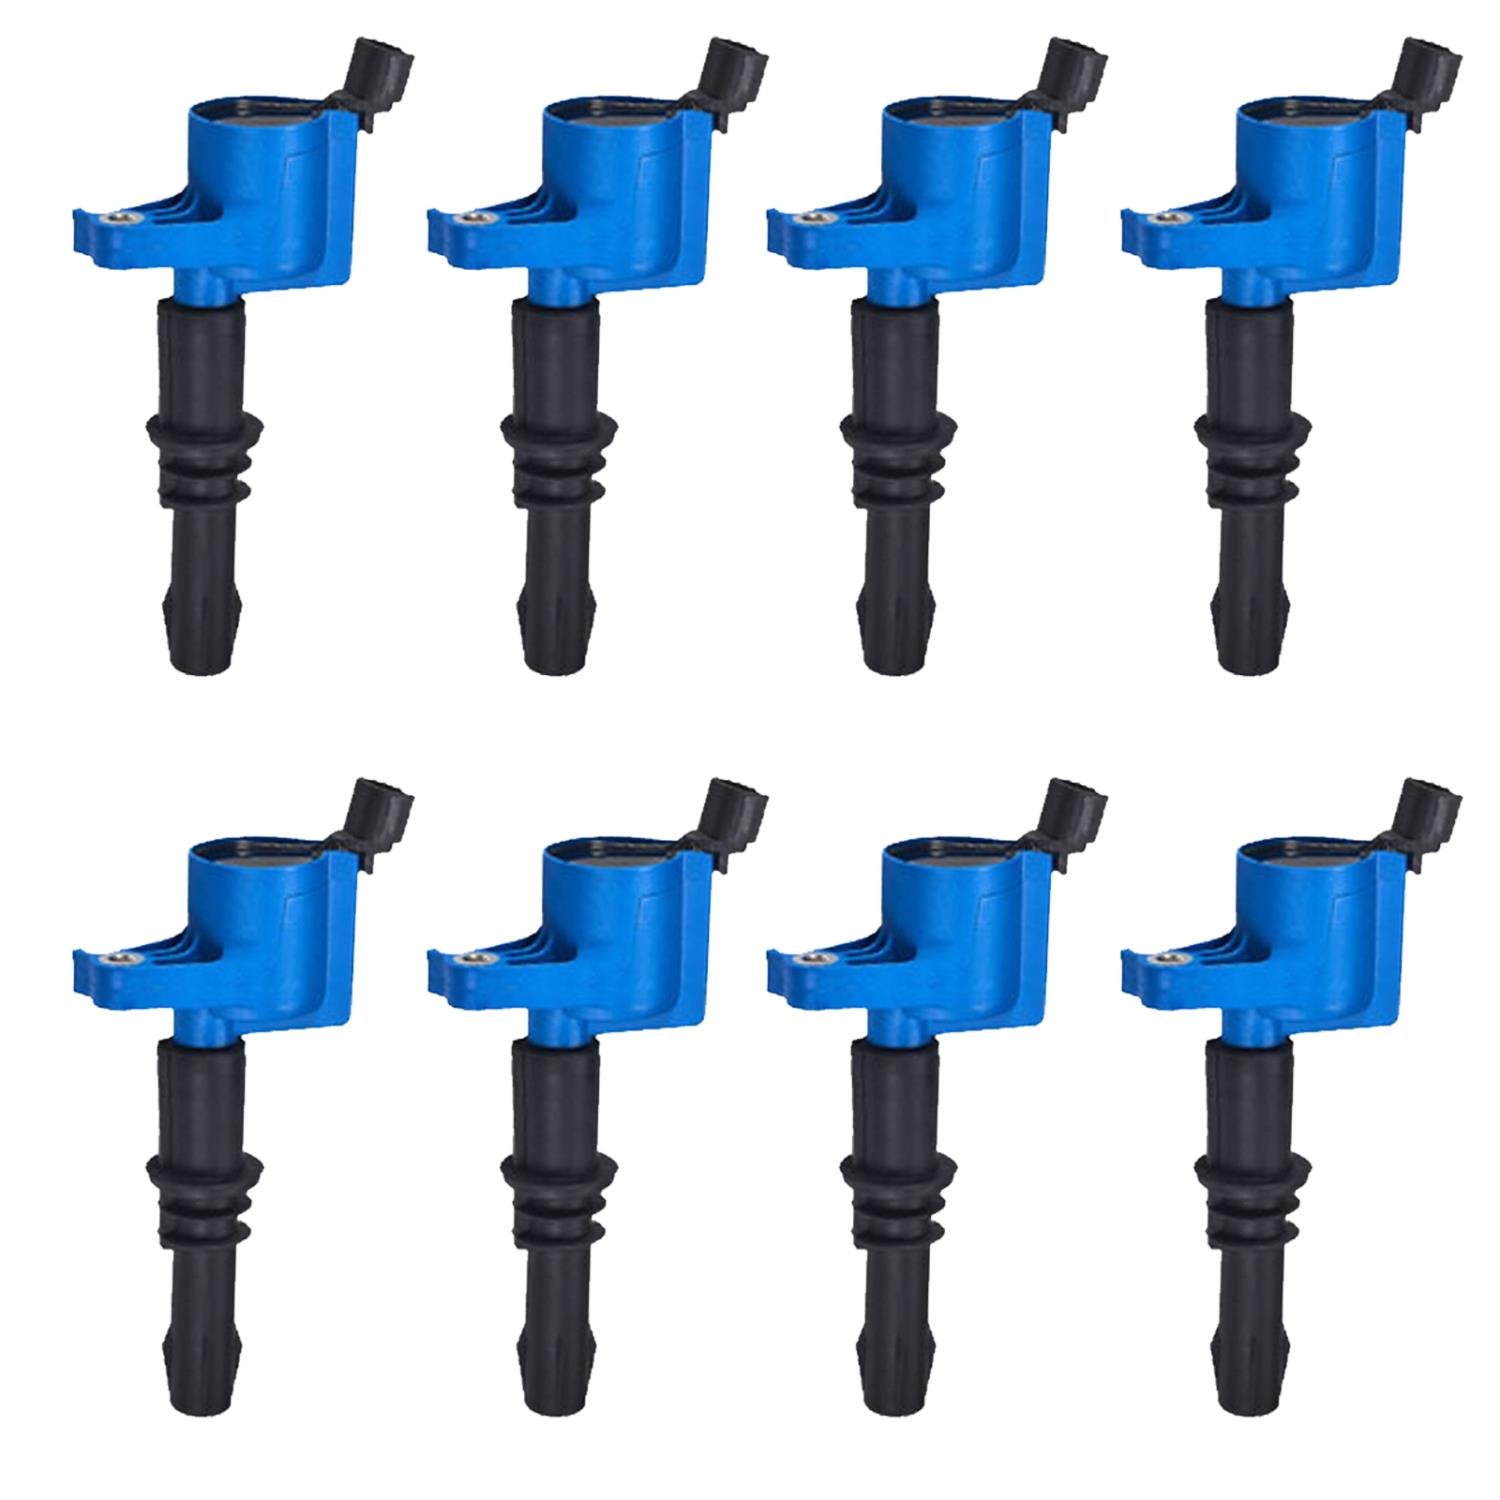 High-Performance Ignition Coils for 2004-2008 Ford F-150/Expedition V8 [Blue]